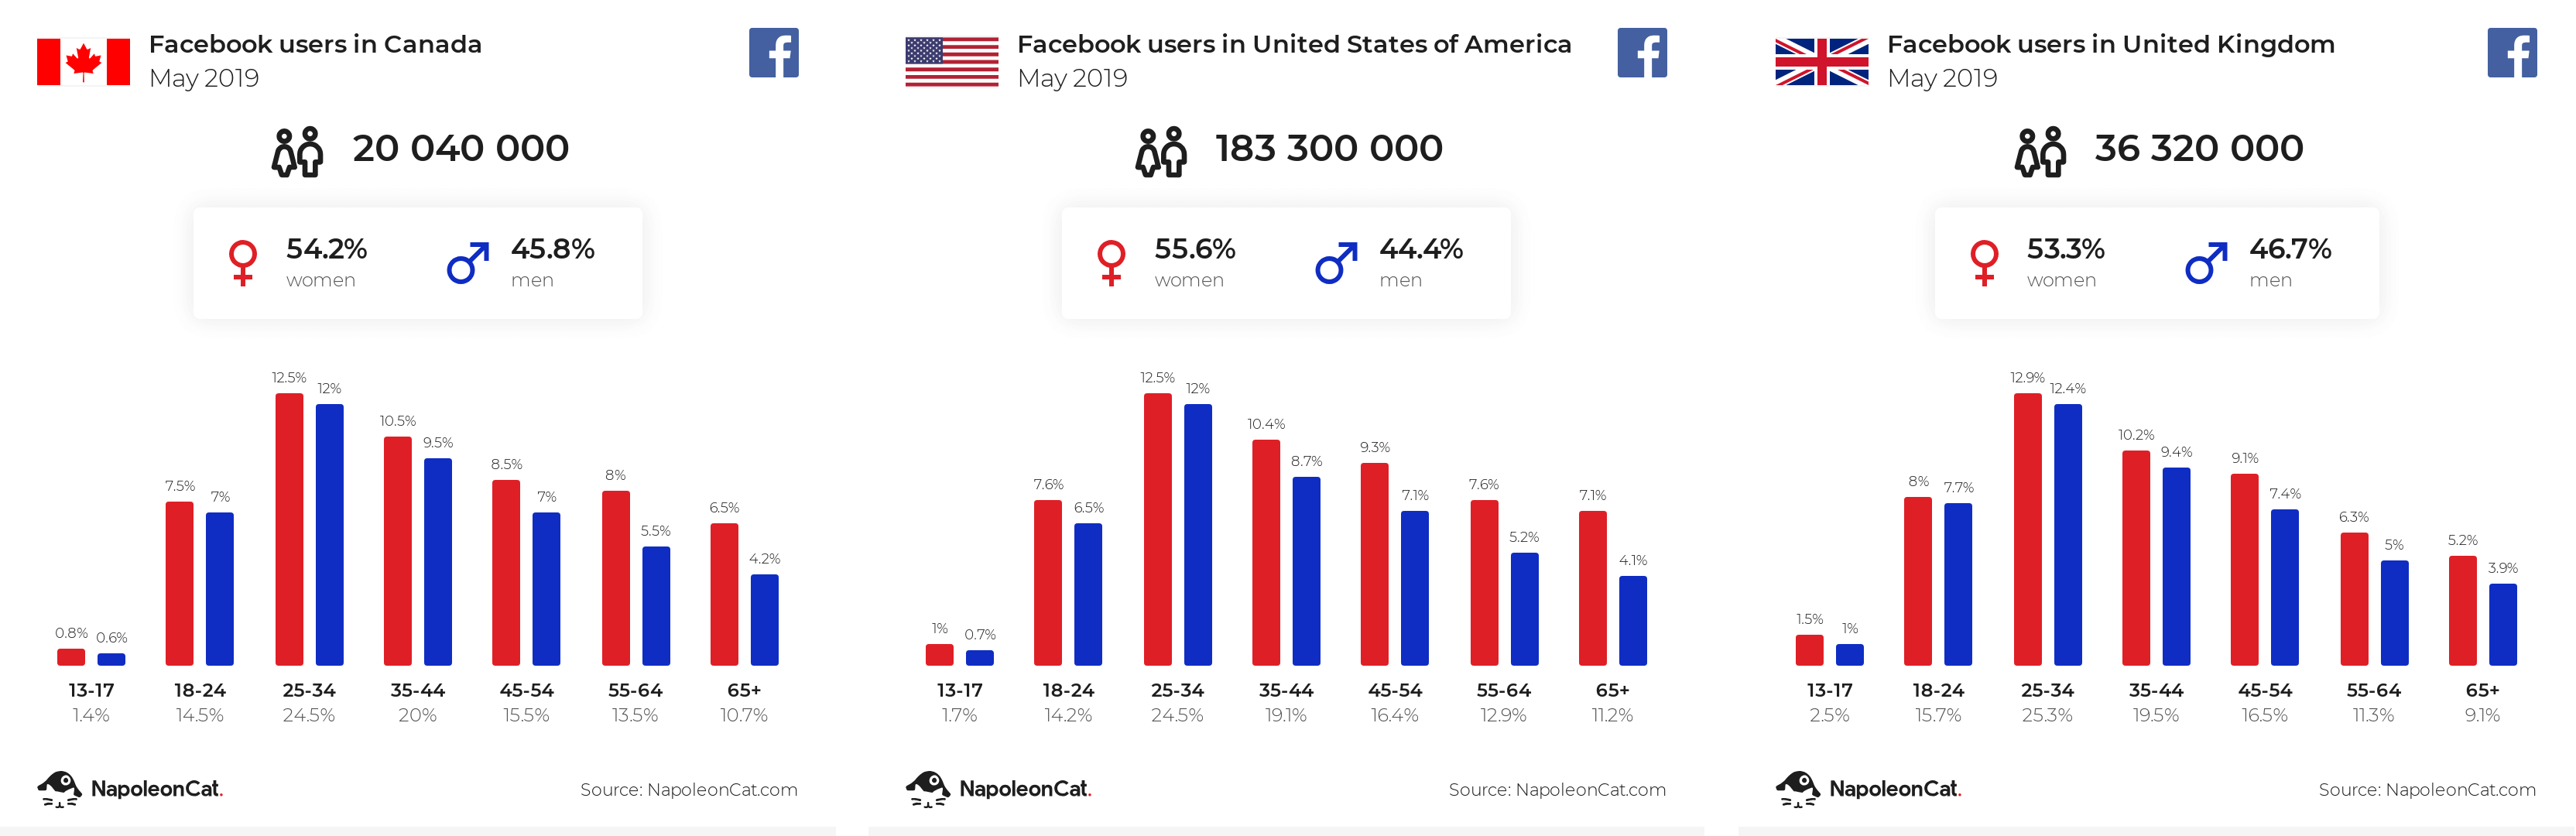 Facebook users in Canada, United States and United Kingdom